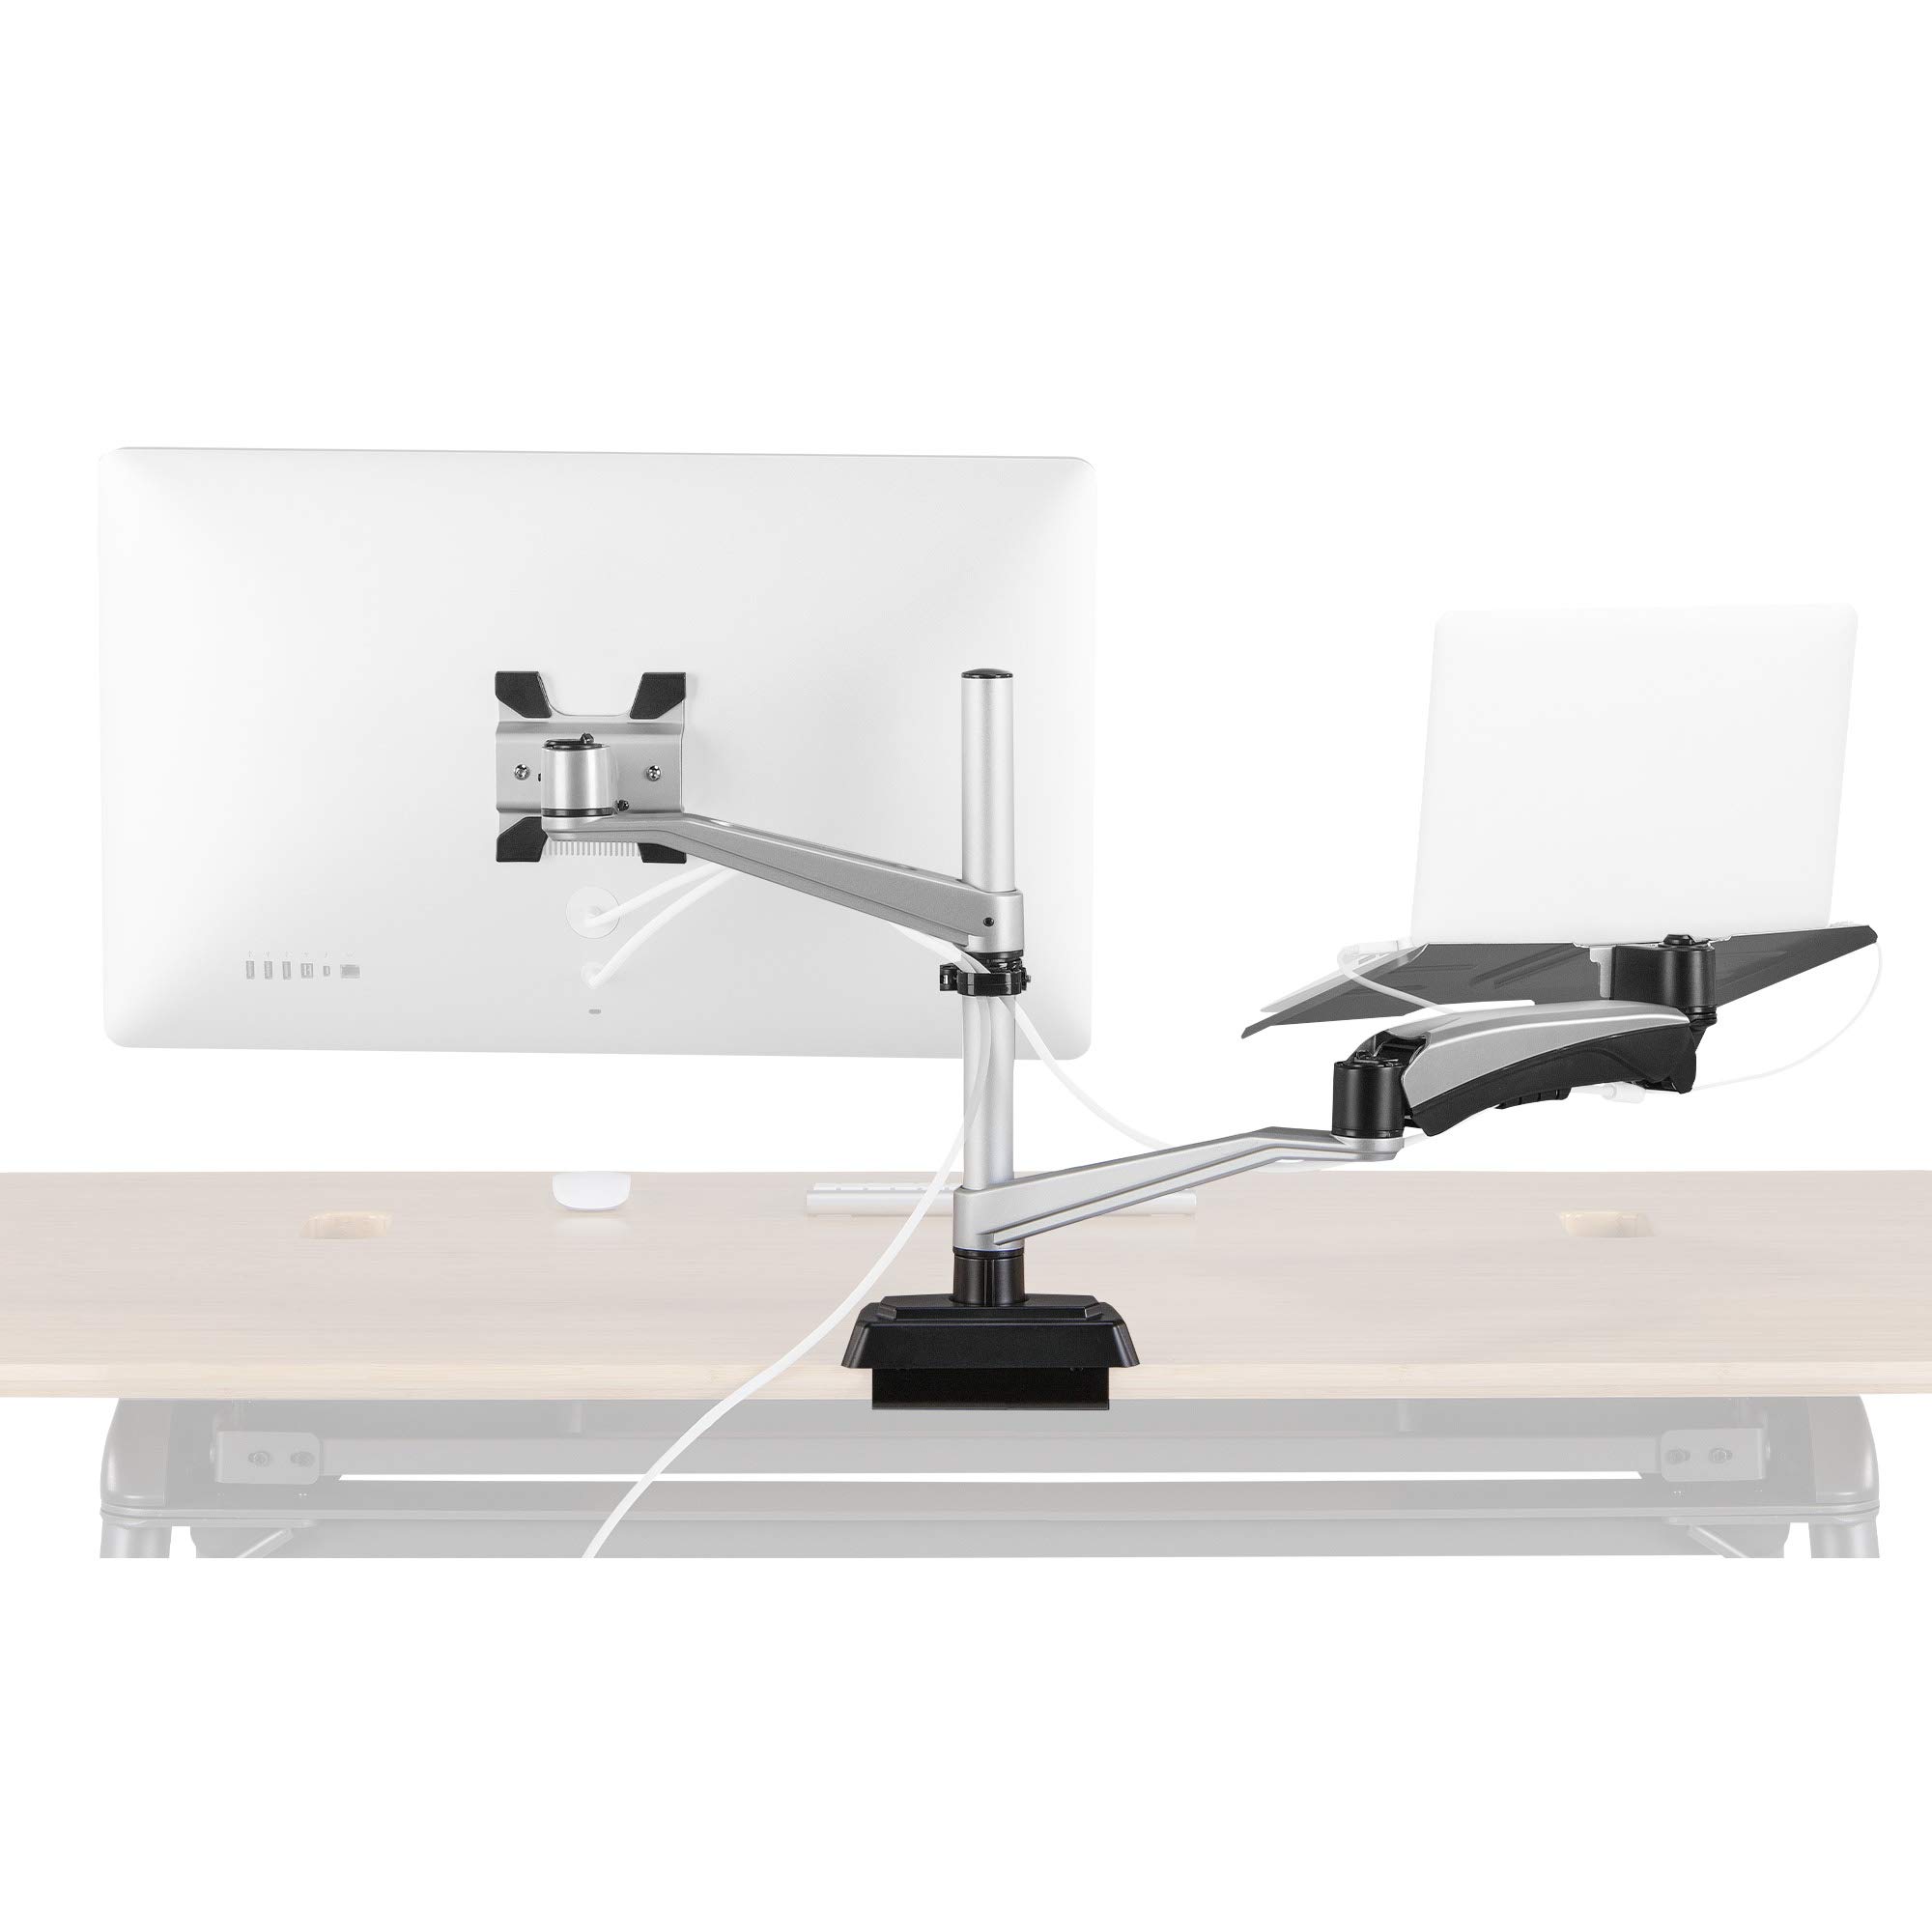 Book Cover Vari Monitor Arm + Laptop Stand - VESA Monitor Mount with 360 Degree Rotation & 15